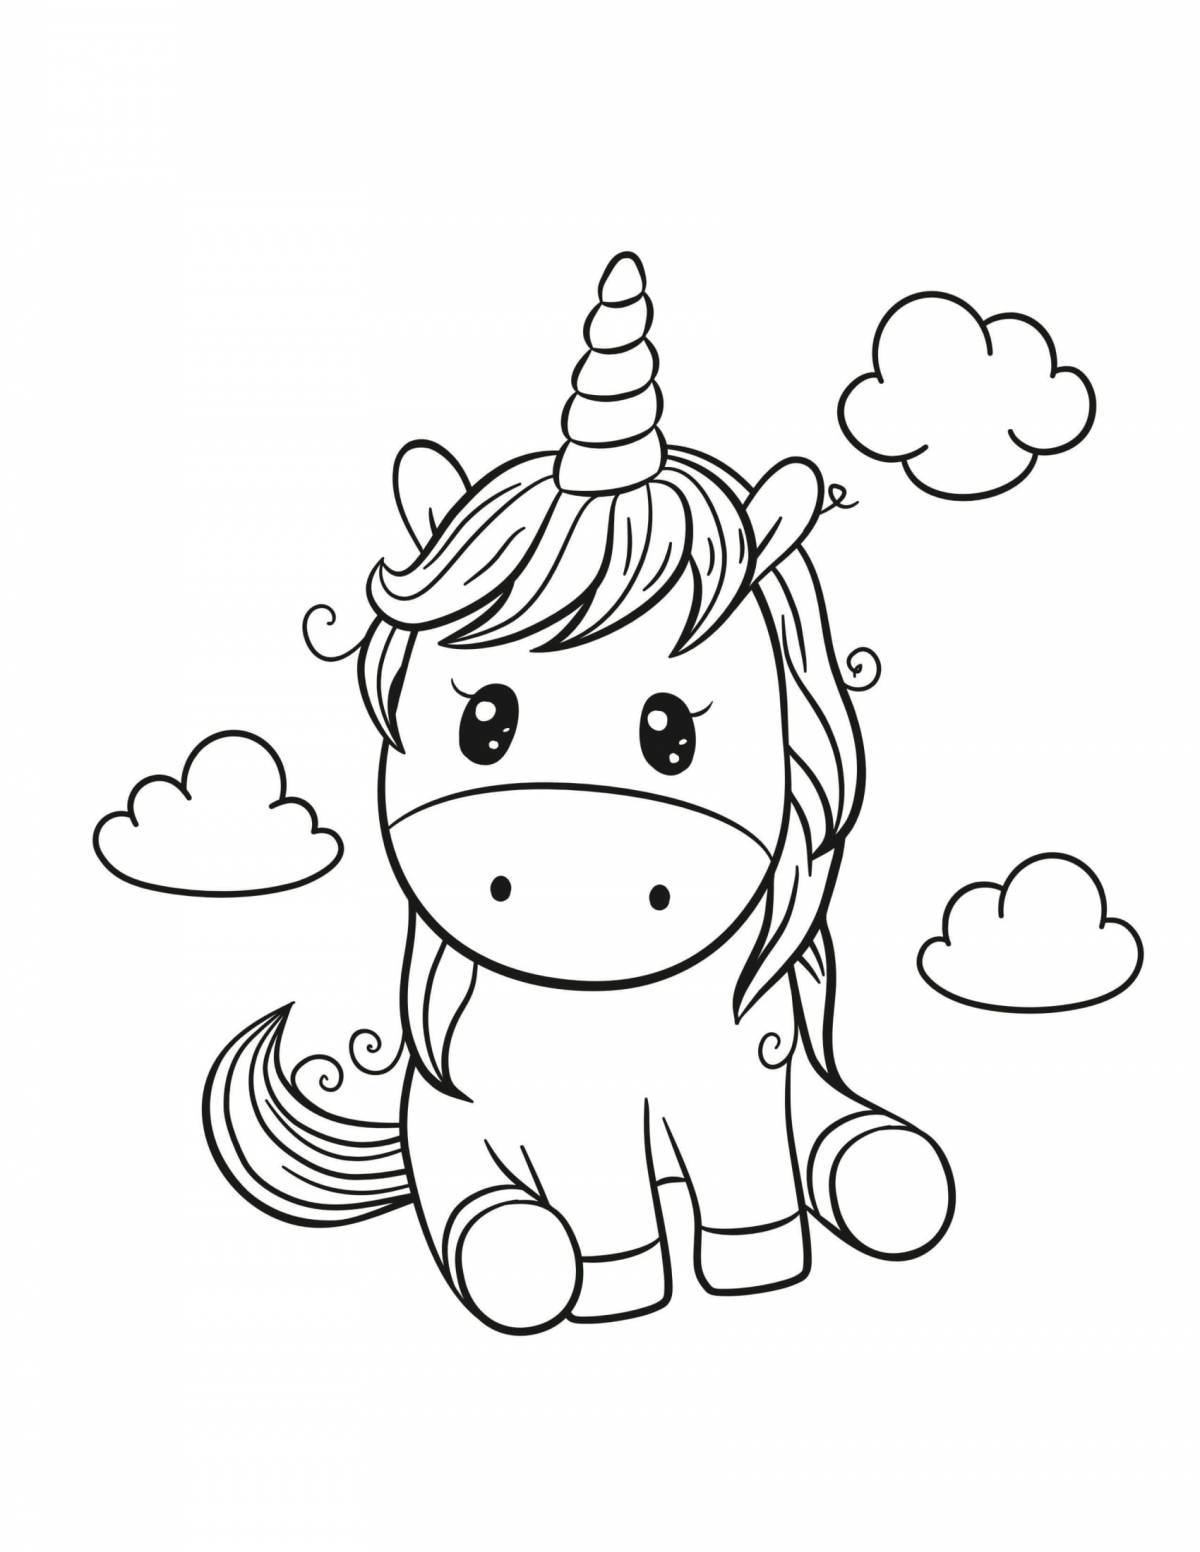 Fancy unicorn coloring book for kids